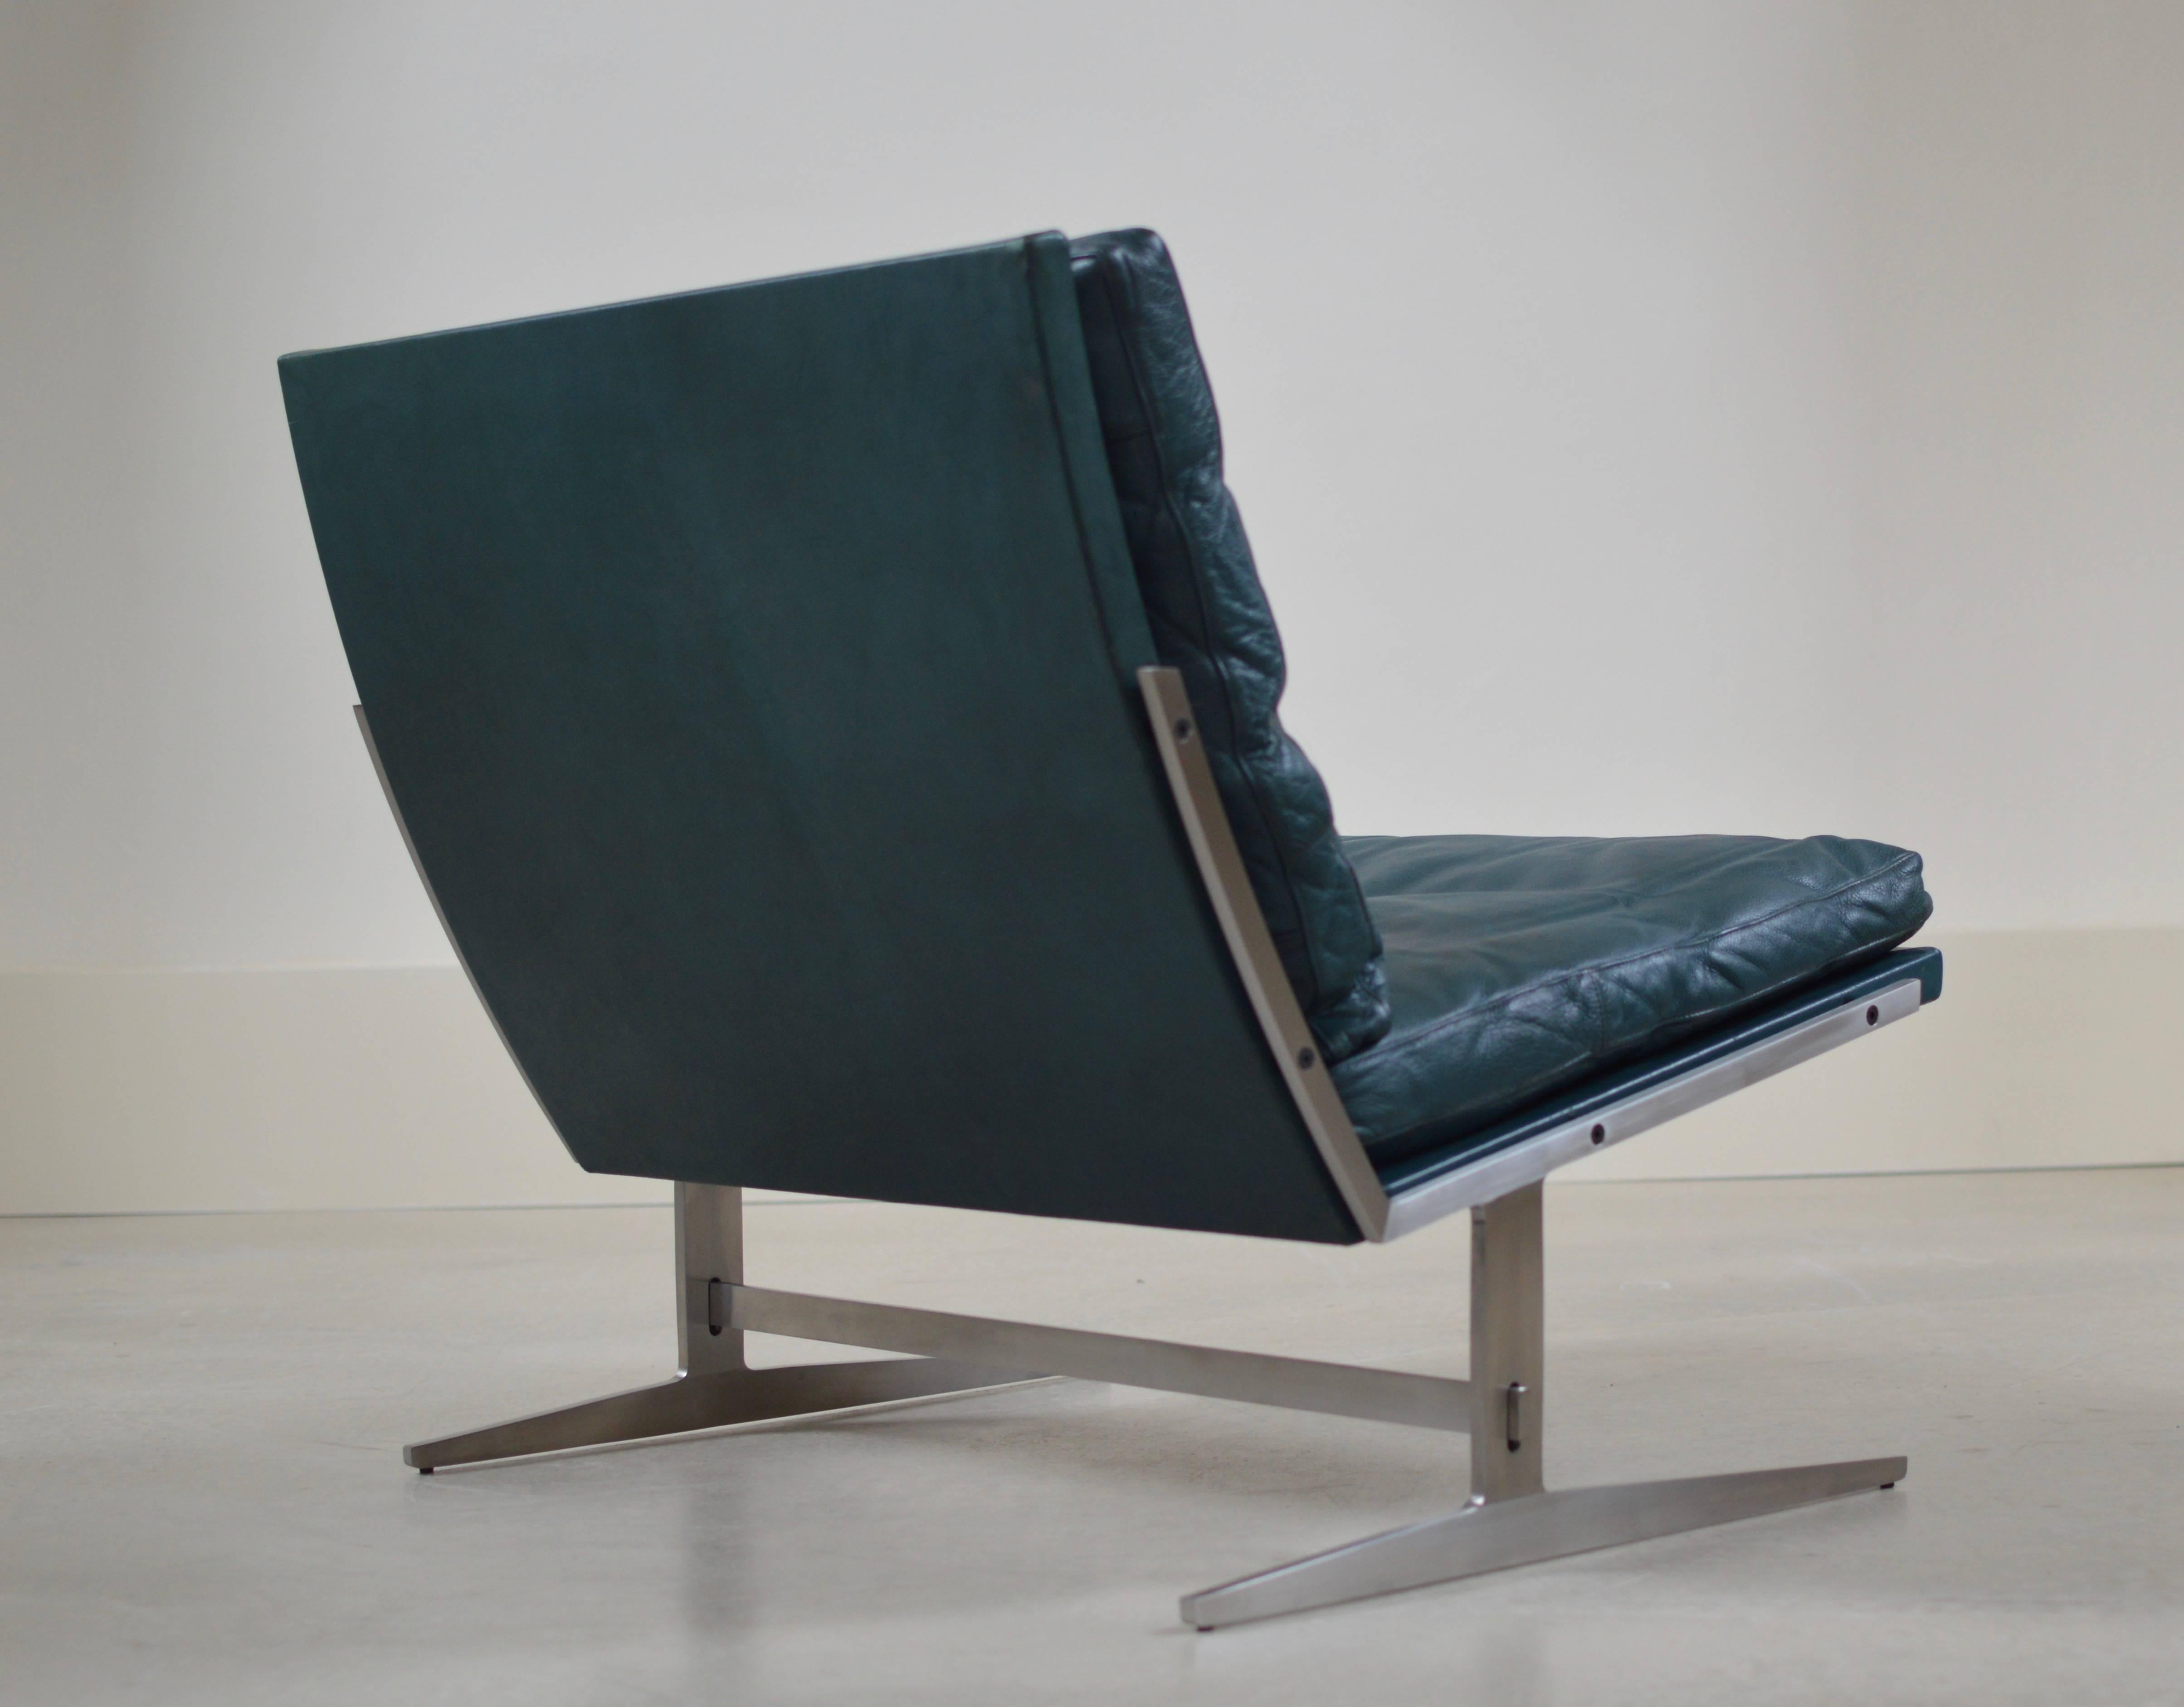 Lounge chair model BO561 by Danish designers Jorgen Kastholm & Preben Fabricius in very unique colour leather. 
 
The chair was designed in 1962 part of a seating series that included sofas and chairs. 
This modern slipper chair is executed in a